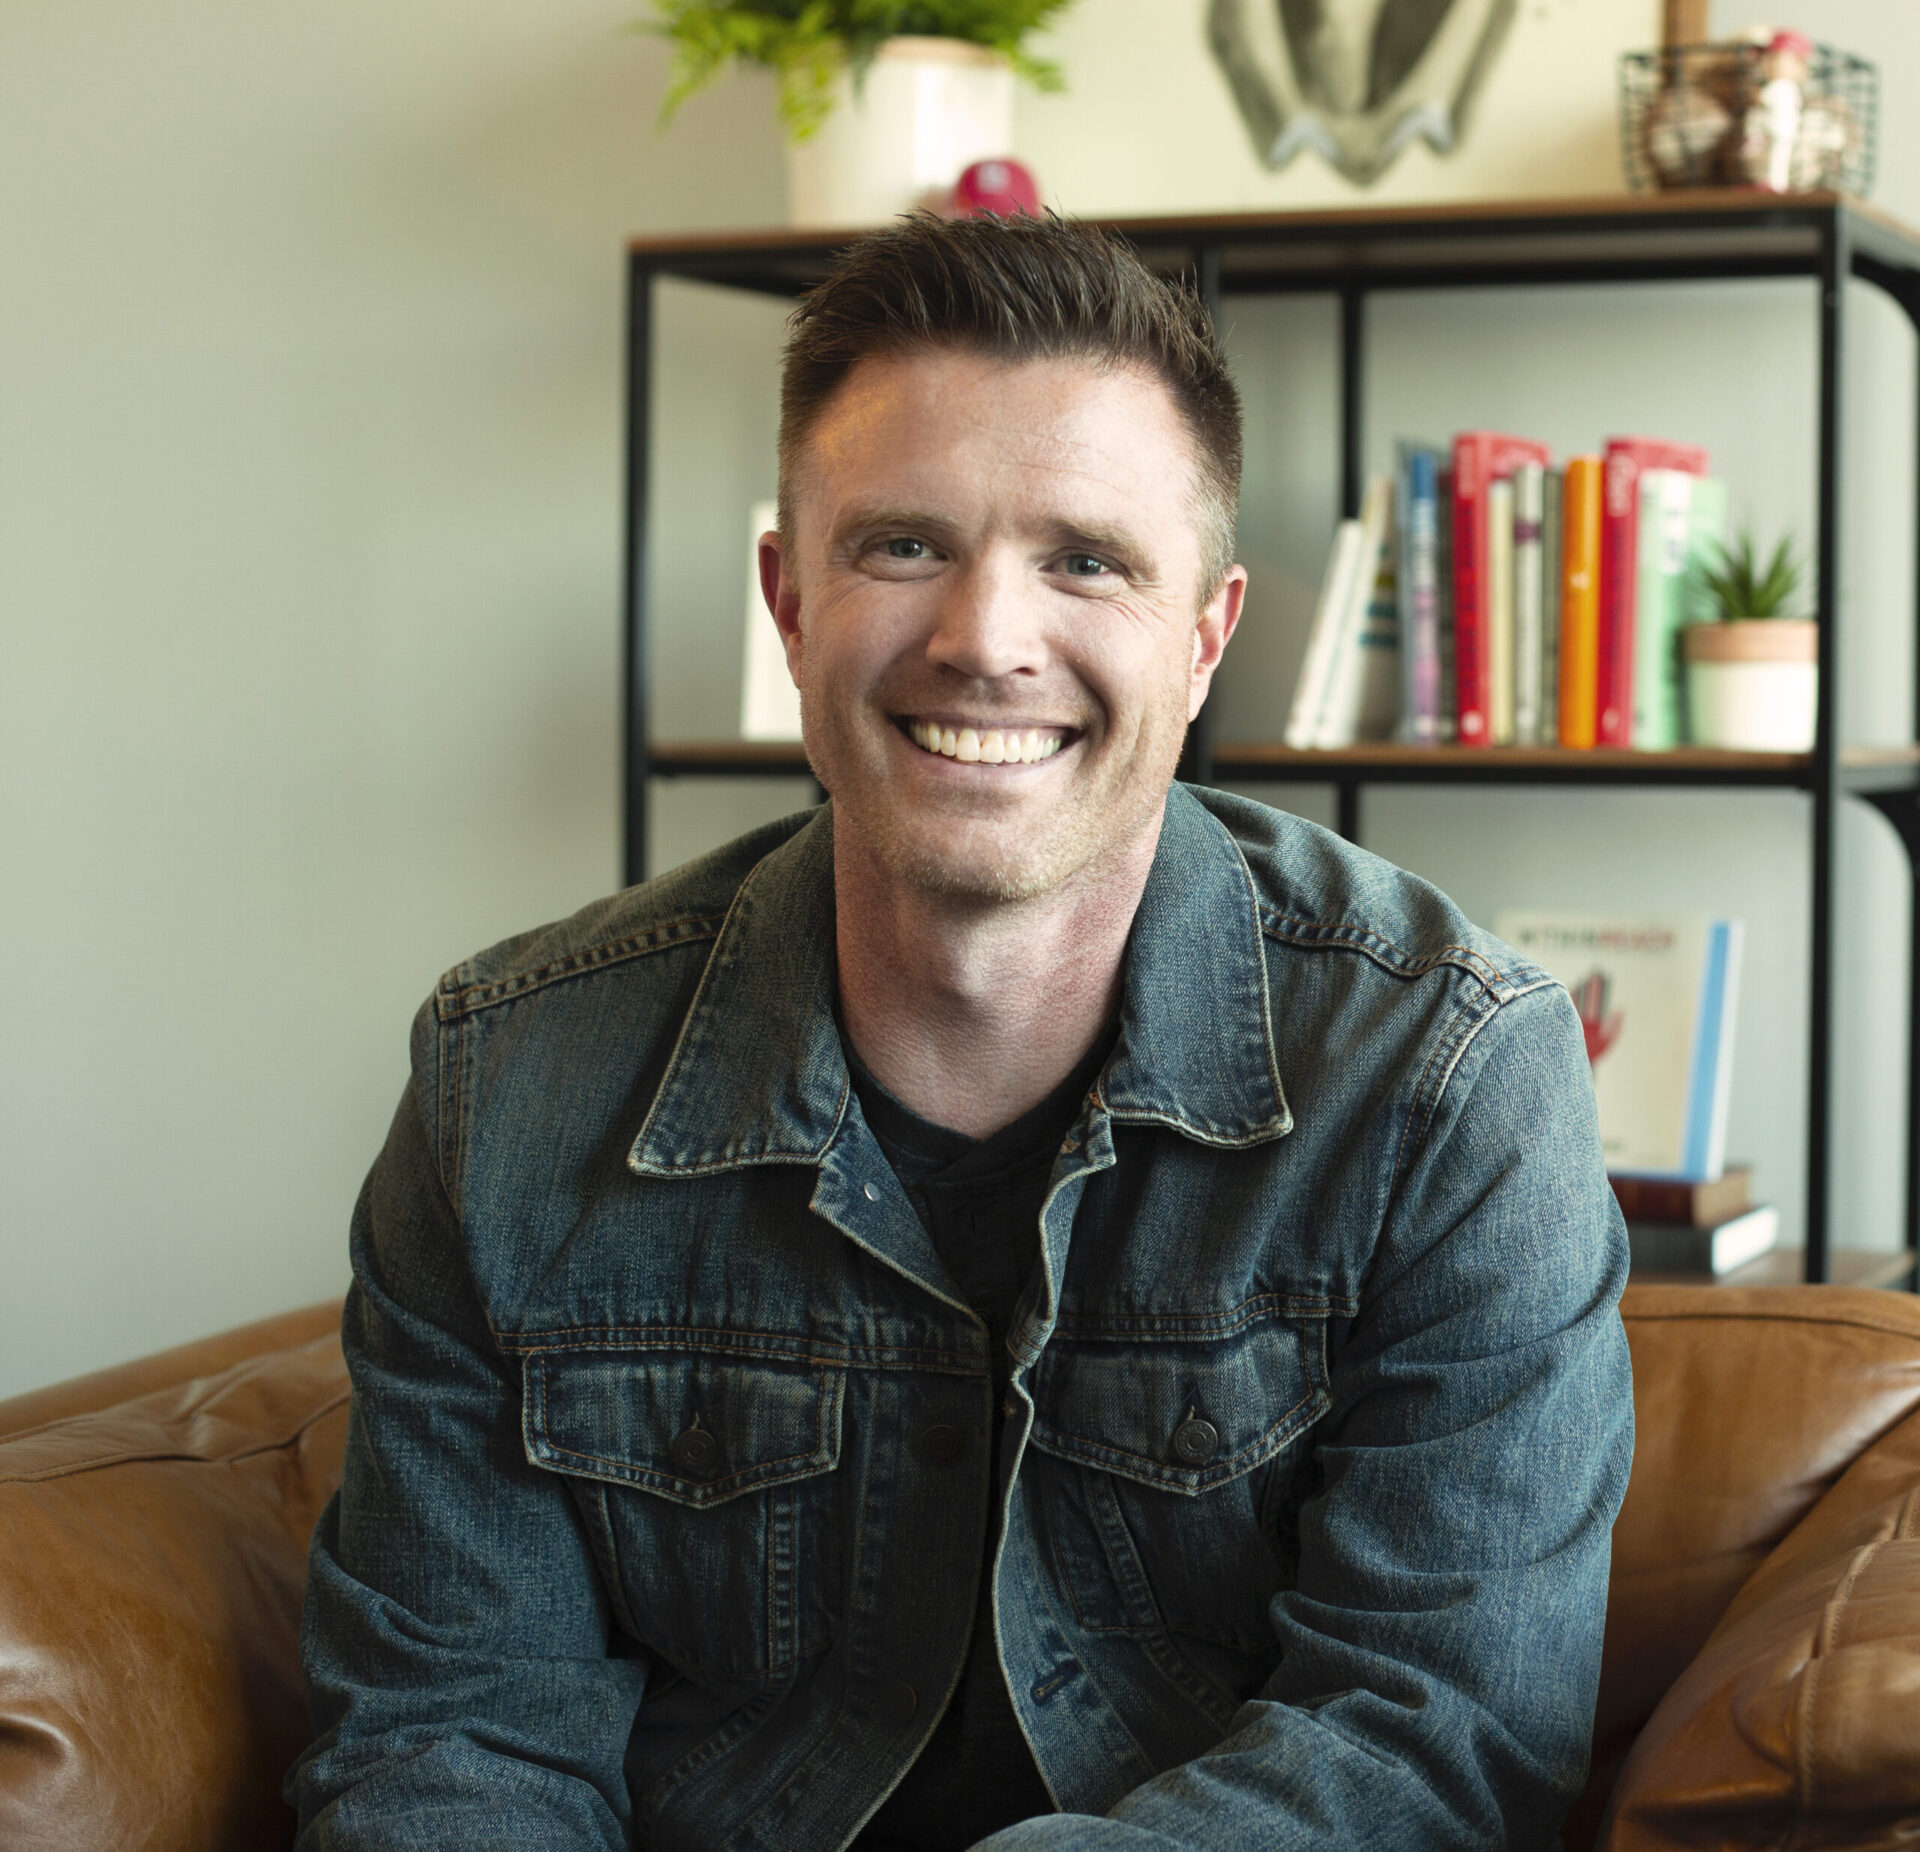 Ben Trueblood serves as the Director of Student Ministry for Lifeway Christian Resources and has twenty years of student ministry experience.